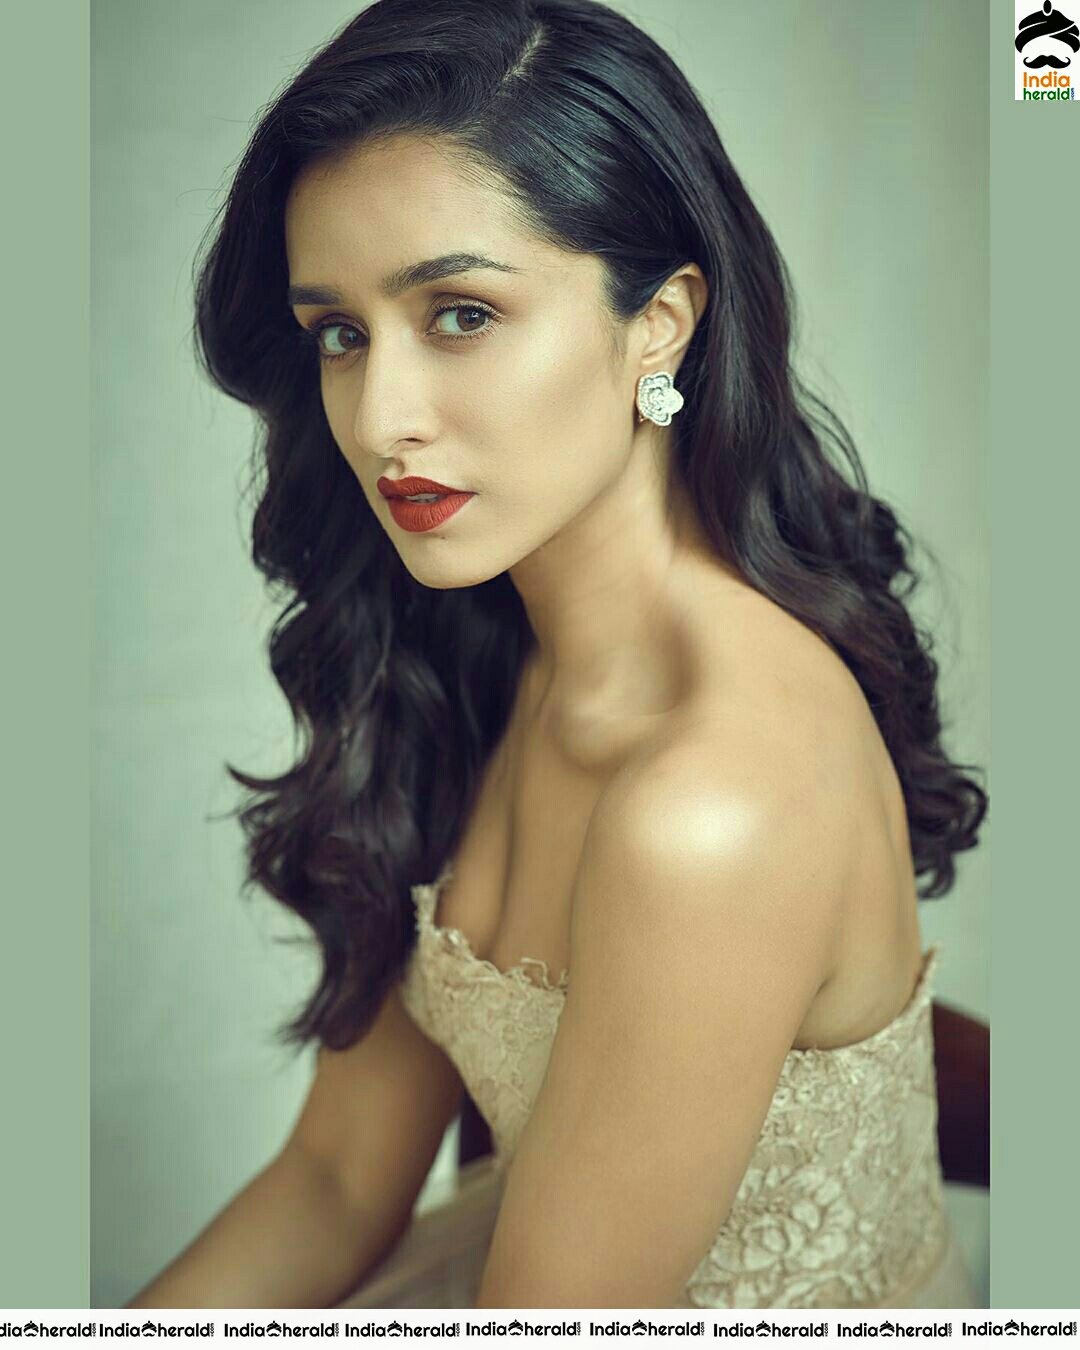 Shraddha Kapoor Looking Preety And Hot In Cleavage Revealing Photoshoot